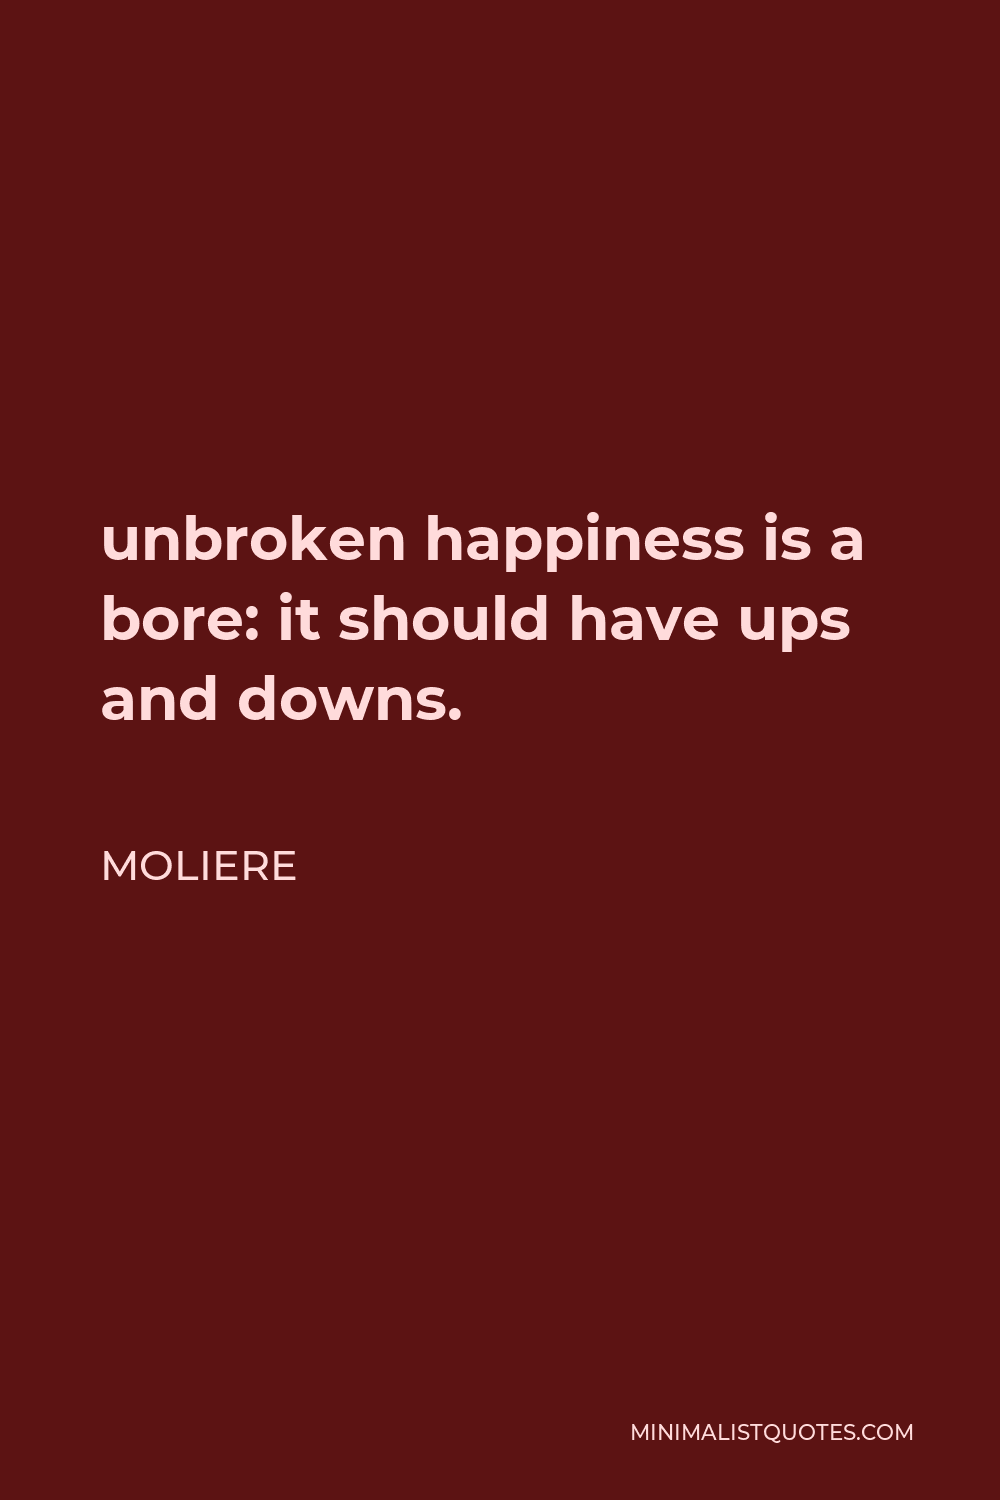 Moliere Quote - unbroken happiness is a bore: it should have ups and downs.